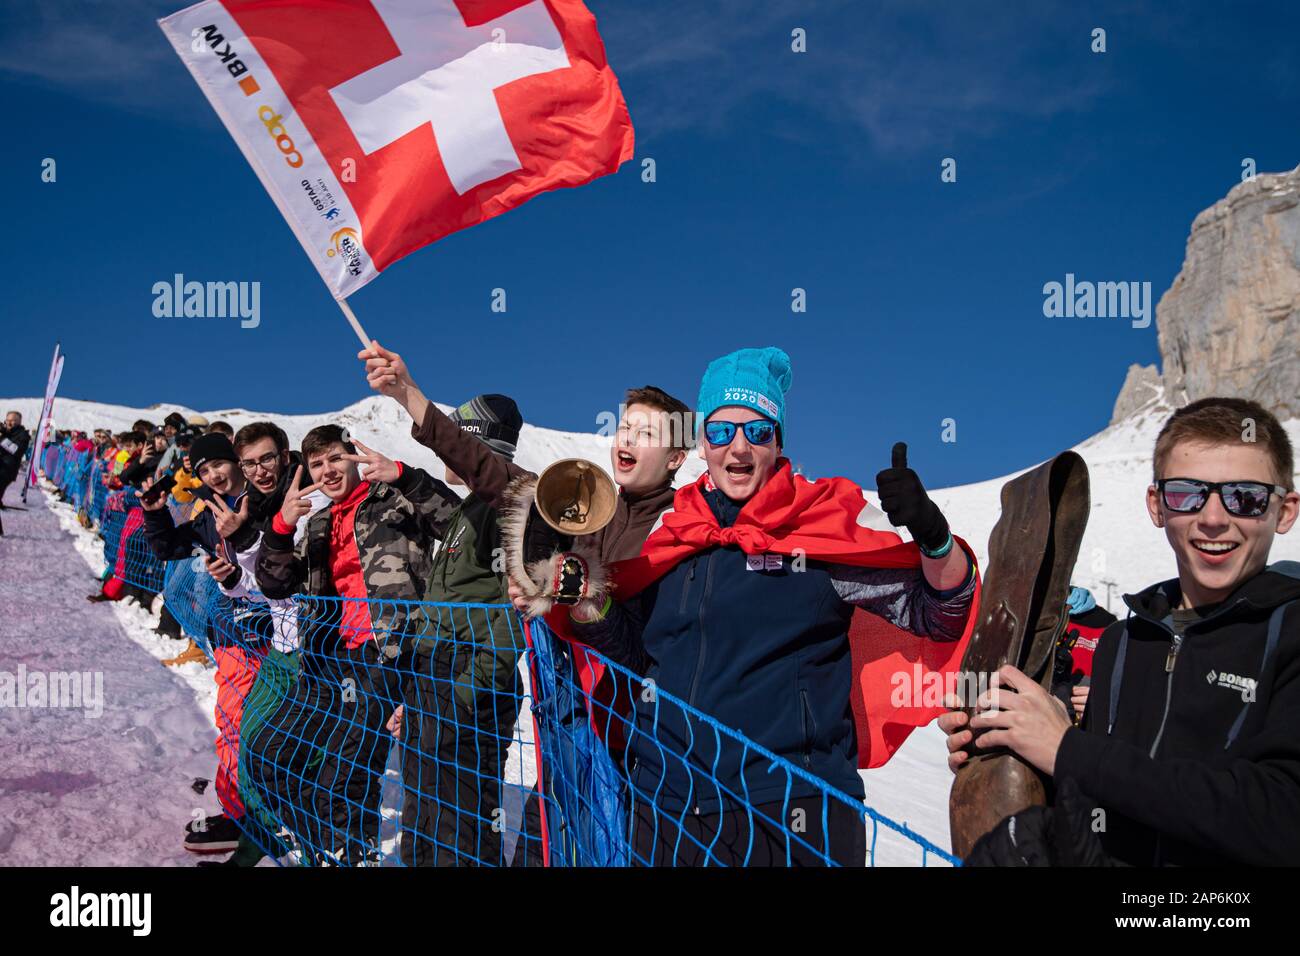 LAUSANNE, SWITZERLAND. 21th, Jan 2020. The local supporter are cheering for their athletes during the Men's Freeski Halfpipe competitions during the Lausanne 2020 Youth Olympic Games at Leysin Park & Pipe on Tuesday, 21 January 2020. LAUSANNE, SWITZERLAND. Credit: Taka G Wu/Alamy Live News Stock Photo